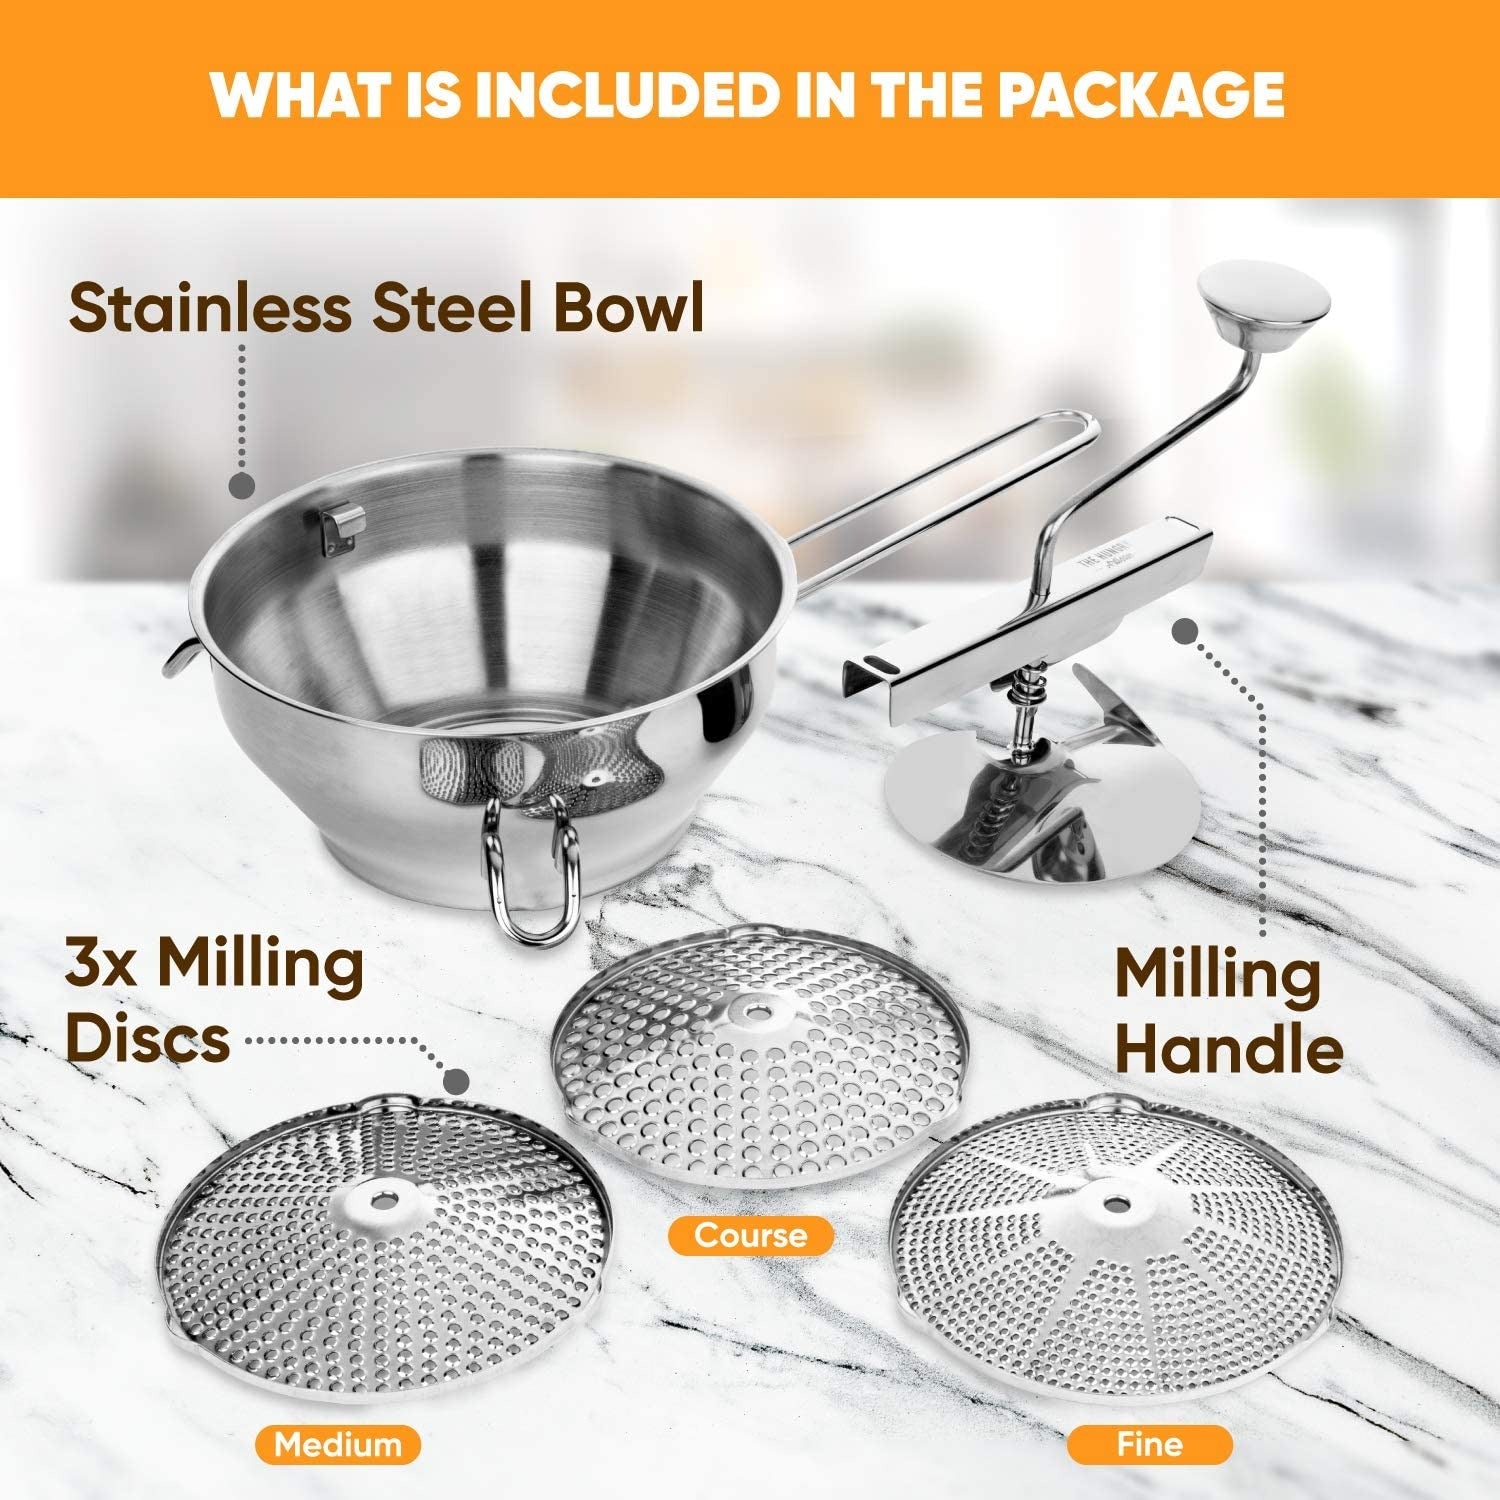  Food Mill Stainless Steel, Food Mill With 3 Discs, Handle Baby  Food Grinder Hand Crank, The Perfect Rotary Food Mill for Tomato Sauce,  Potatoes, Baby Food or Canned Goods : Home